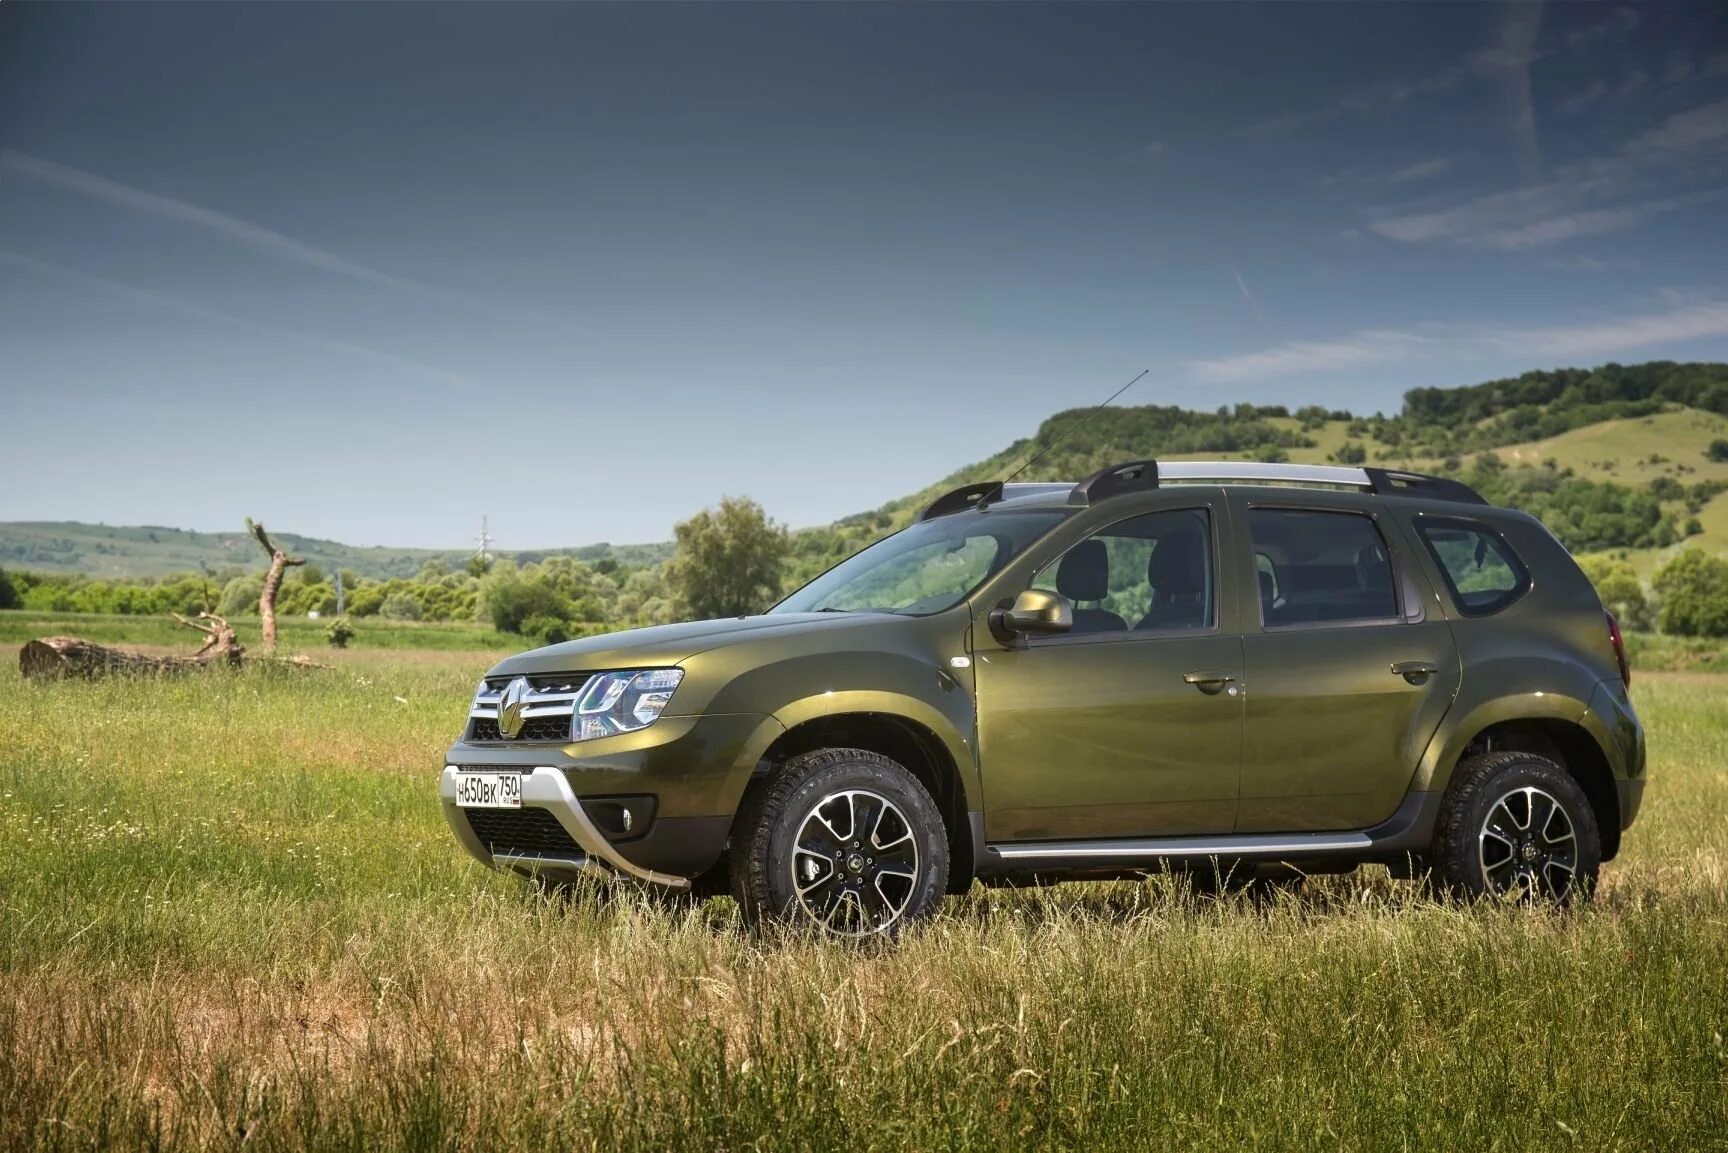 Renault Duster 2. Renault Duster 2015. Рено Дастер 2015. Рено Дастер 2 2015.